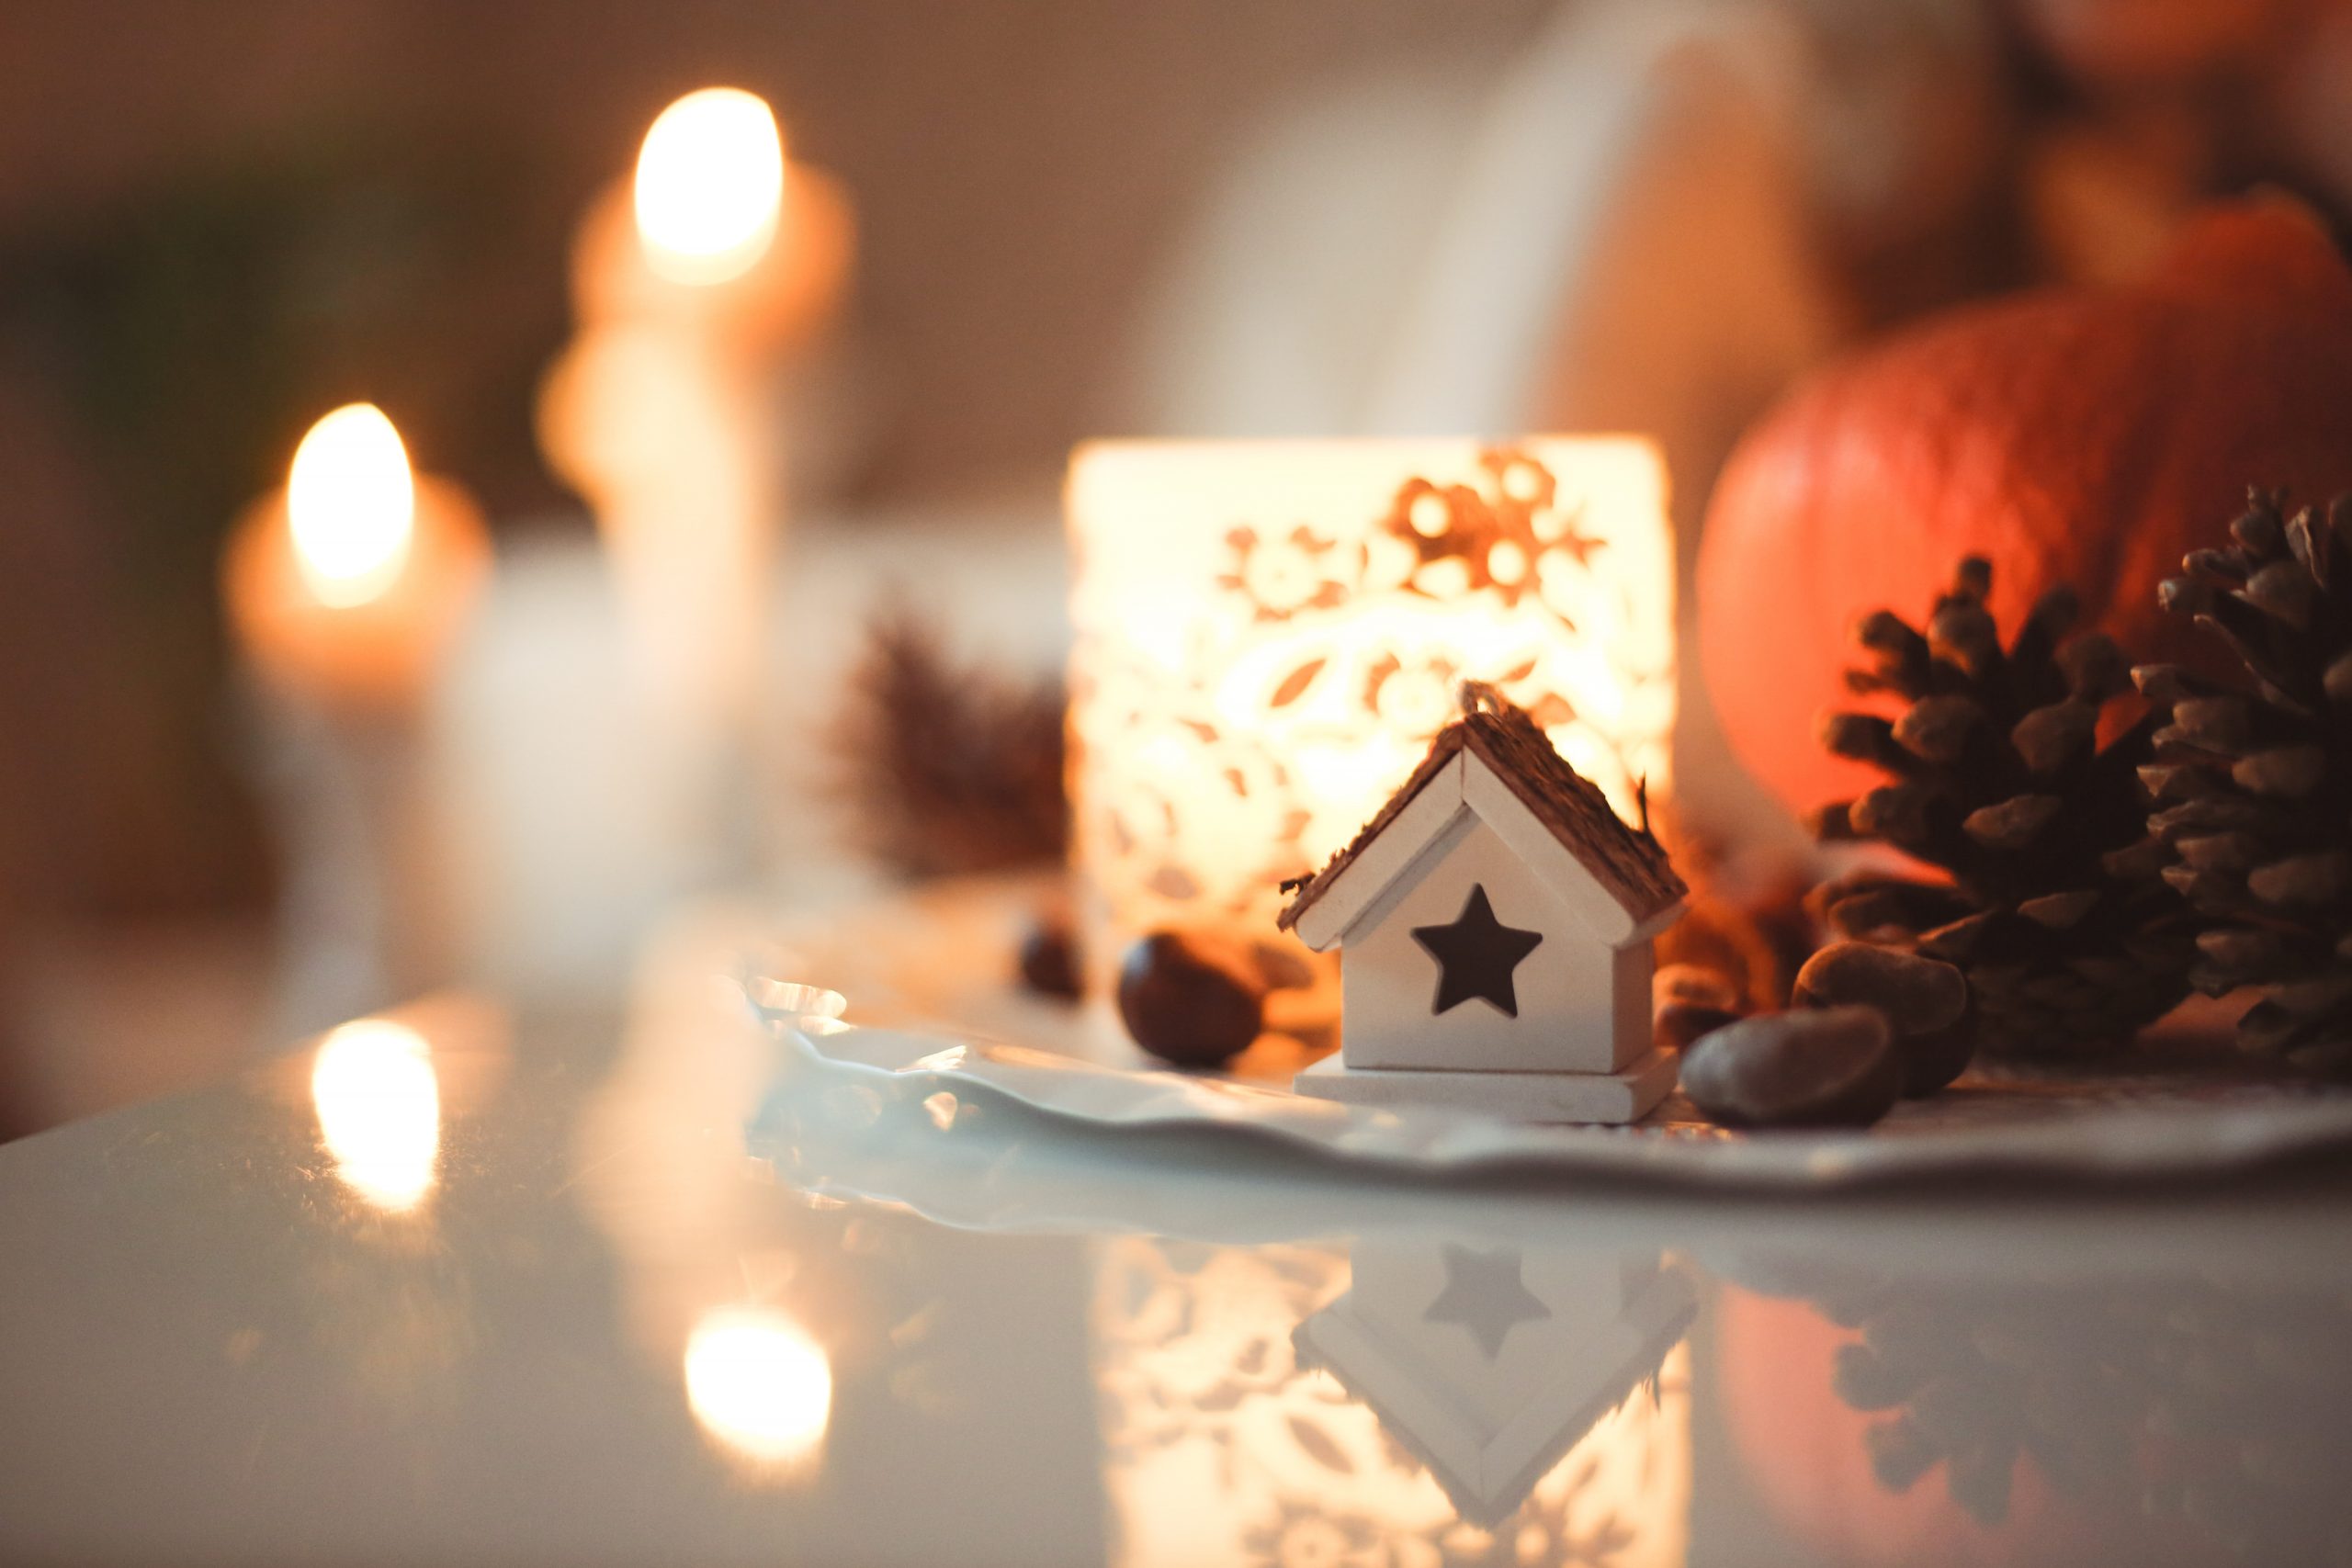 Scene of small Christmas house with candles